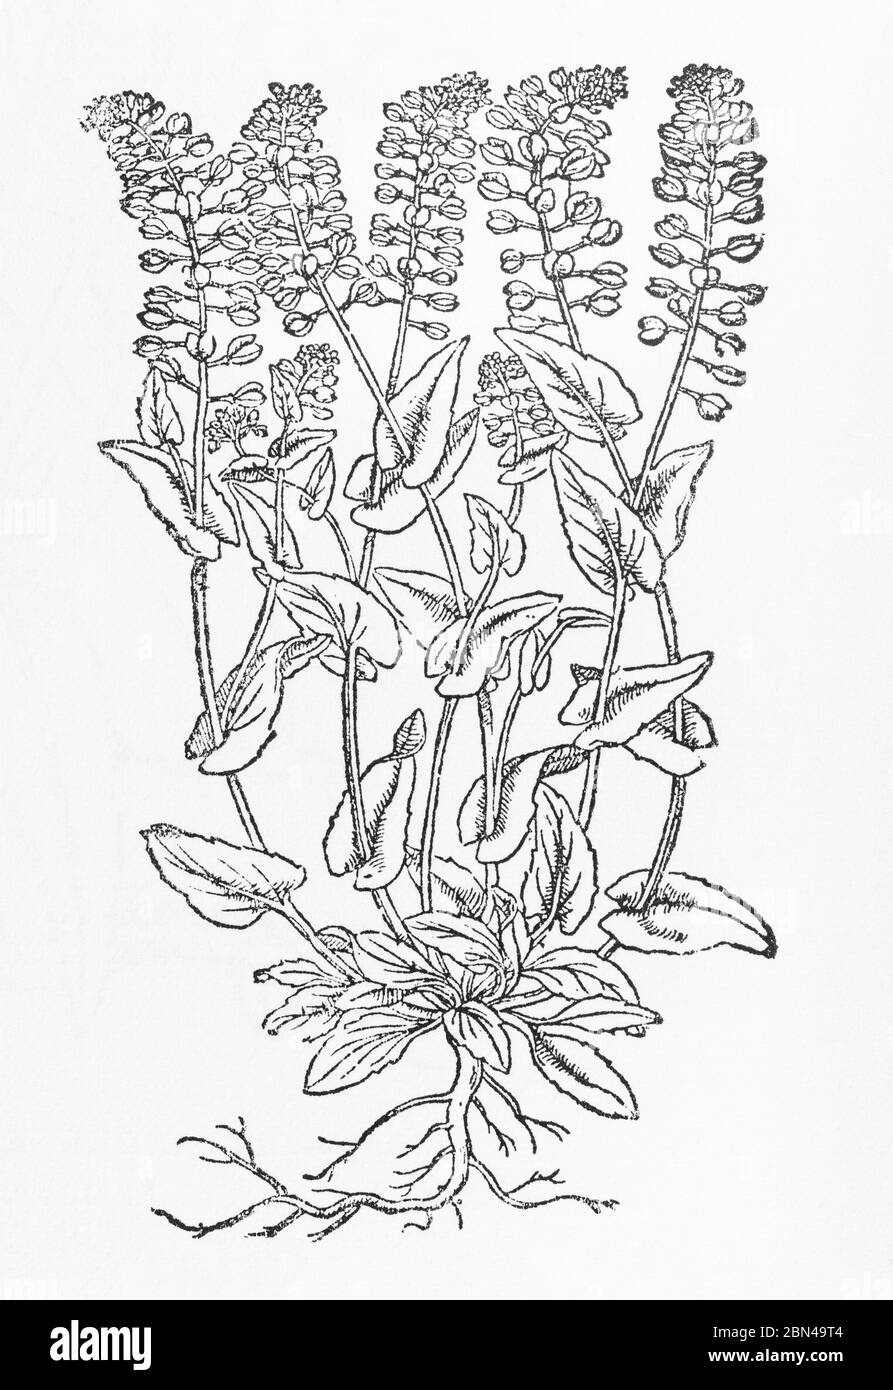 Woodcut identified as Hoary Mustard / Thlaspi incanum in Gerarde's Herball, History of Plants. P208 May be Perfoliate Penny-Cress, Thlaspi perfoliatum Stock Photo